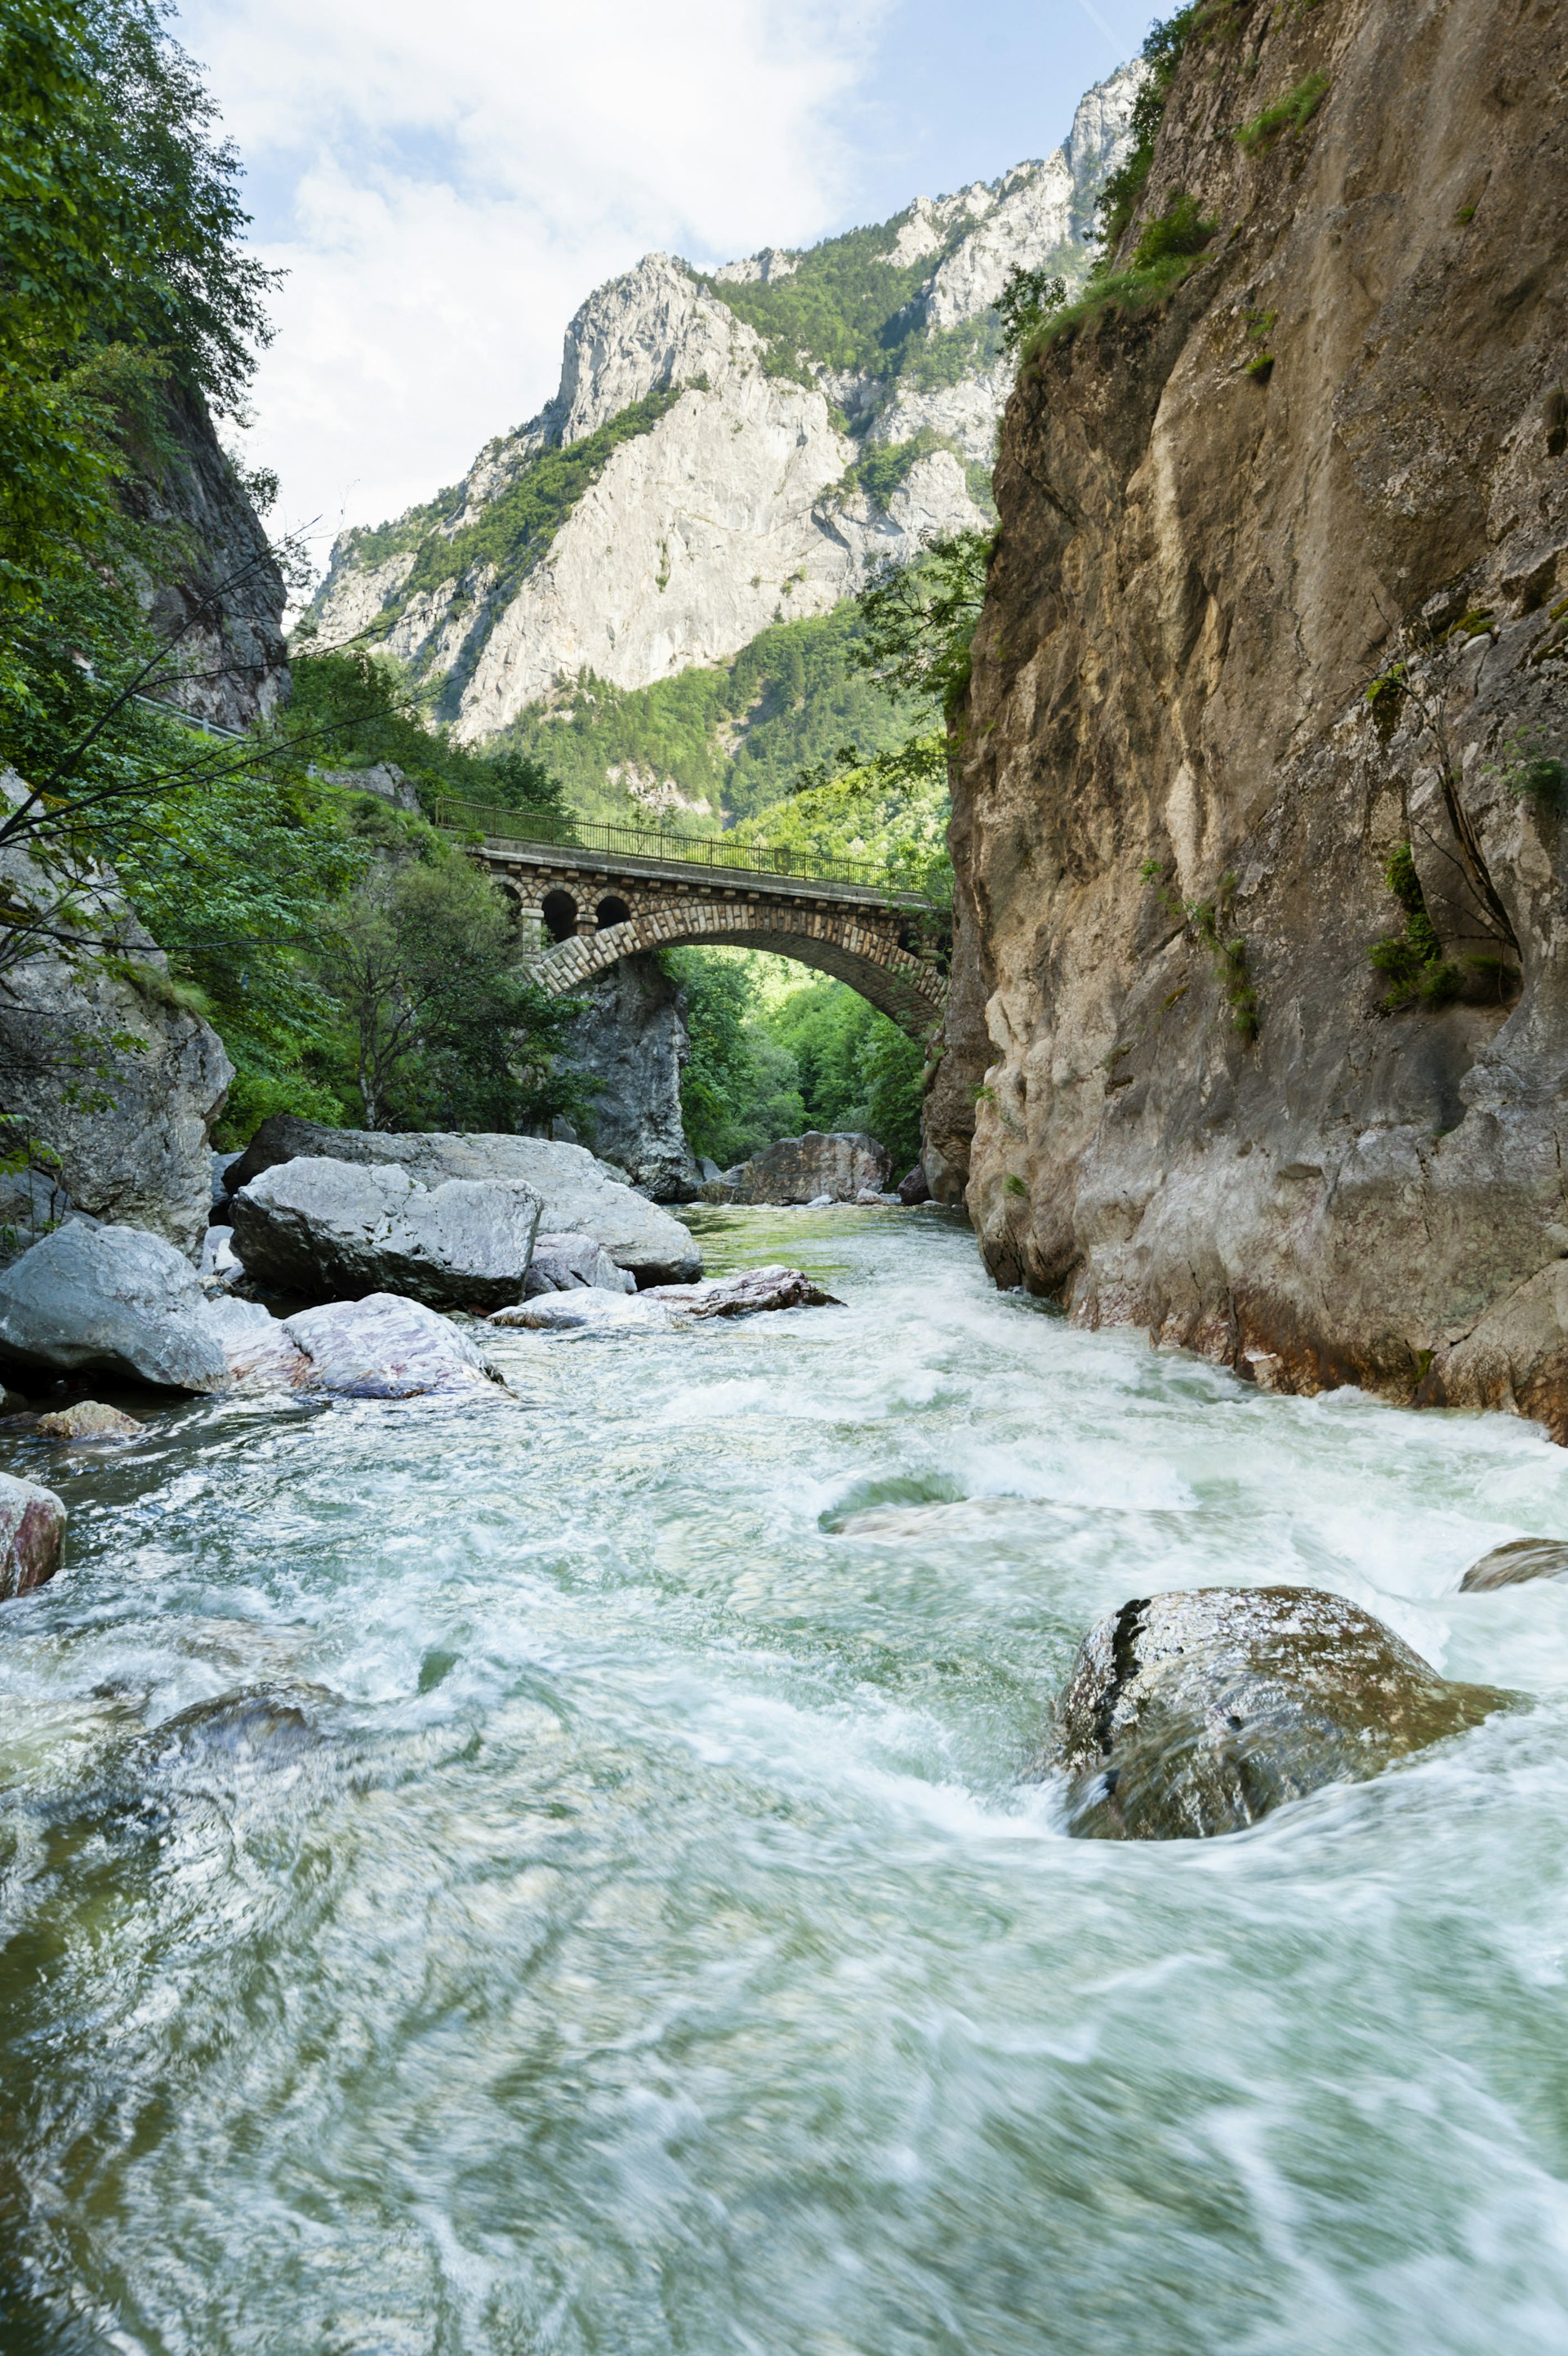 An old bridge over a canyon with rushing water below